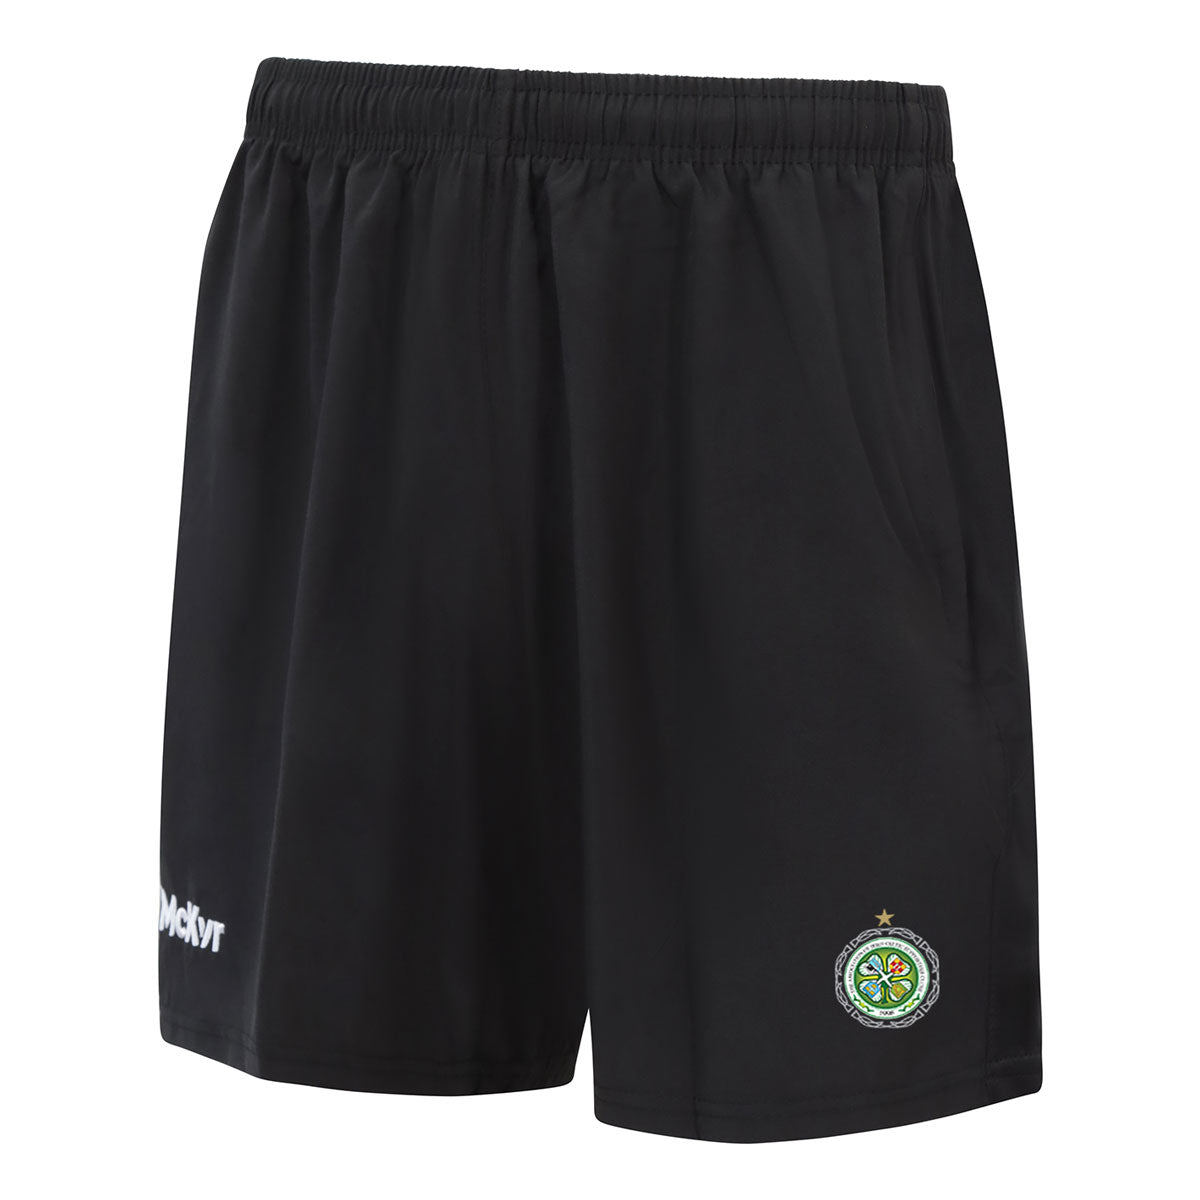 Mc Keever The Association of Irish Celtic Supporters Clubs Core 22 Leisure Shorts - Adult - Black